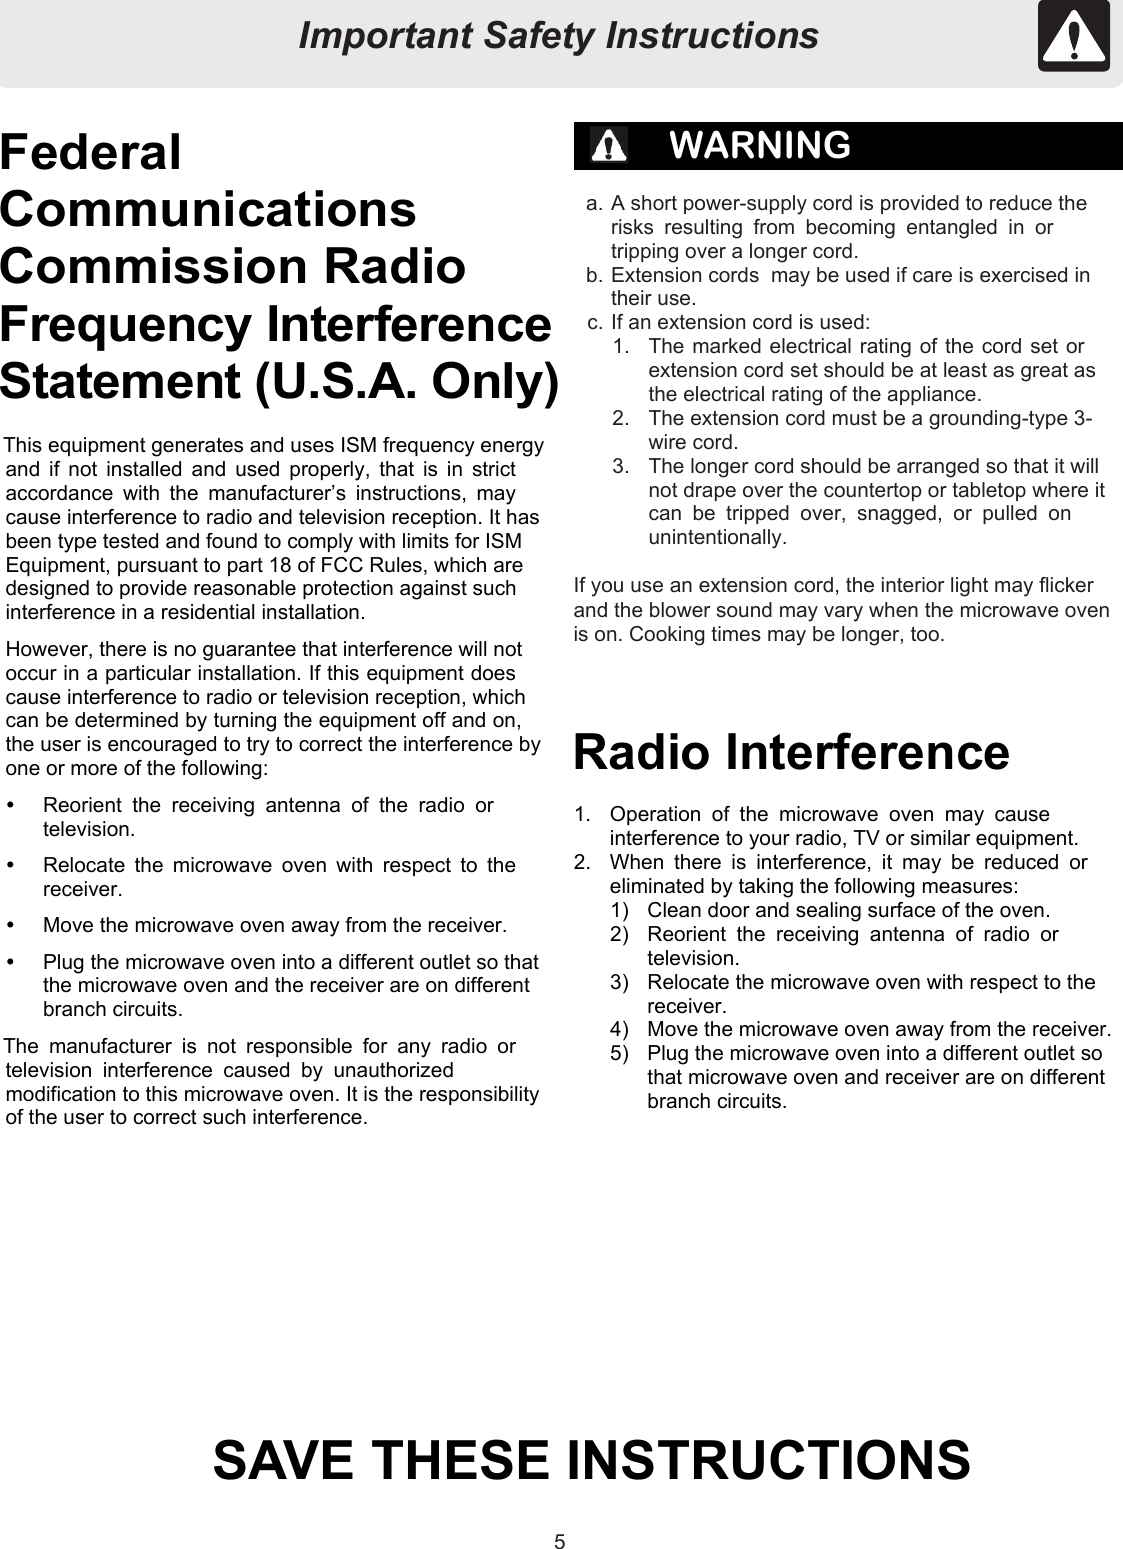 55FederalCommunicationsCommission RadioFrequency InterferenceStatement (U.S.A. Only)WARNINGa. A short power-supply cord is provided to reduce therisks resulting from becoming entangled in ortripping over a longer cord.b. Extension cords  may be used if care is exercised intheir use.c. If an extension cord is used:1.  The marked electrical rating of the cord set orextension cord set should be at least as great asthe electrical rating of the appliance.2.  The extension cord must be a grounding-type 3-wire cord.3.  The longer cord should be arranged so that it willnot drape over the countertop or tabletop where itcan be tripped over, snagged, or pulled onunintentionally.If you use an extension cord, the interior light may flickerand the blower sound may vary when the microwave ovenis on. Cooking times may be longer, too.This equipment generates and uses ISM frequency energyand if not installed and used properly, that is in strictaccordance with the manufacturer’s instructions, maycause interference to radio and television reception. It hasbeen type tested and found to comply with limits for ISMEquipment, pursuant to part 18 of FCC Rules, which aredesigned to provide reasonable protection against suchinterference in a residential installation.However, there is no guarantee that interference will notoccur in a particular installation. If this equipment doescause interference to radio or television reception, whichcan be determined by turning the equipment off and on,the user is encouraged to try to correct the interference byone or more of the following:  Reorient the receiving antenna of the radio ortelevision.  Relocate the microwave oven with respect to thereceiver.  Move the microwave oven away from the receiver.  Plug the microwave oven into a different outlet so thatthe microwave oven and the receiver are on differentbranch circuits.The manufacturer is not responsible for any radio ortelevision interference caused by unauthorizedmodification to this microwave oven. It is the responsibilityof the user to correct such interference.Radio Interference1.  Operation of the microwave oven may causeinterference to your radio, TV or similar equipment.2.  When there is interference, it may be reduced oreliminated by taking the following measures:1)  Clean door and sealing surface of the oven.2)  Reorient the receiving antenna of radio ortelevision.3)  Relocate the microwave oven with respect to thereceiver.4)  Move the microwave oven away from the receiver.5)  Plug the microwave oven into a different outlet sothat microwave oven and receiver are on differentbranch circuits.SAVE THESE INSTRUCTIONSImportant Safety InstructionsImportant Safety Instructions